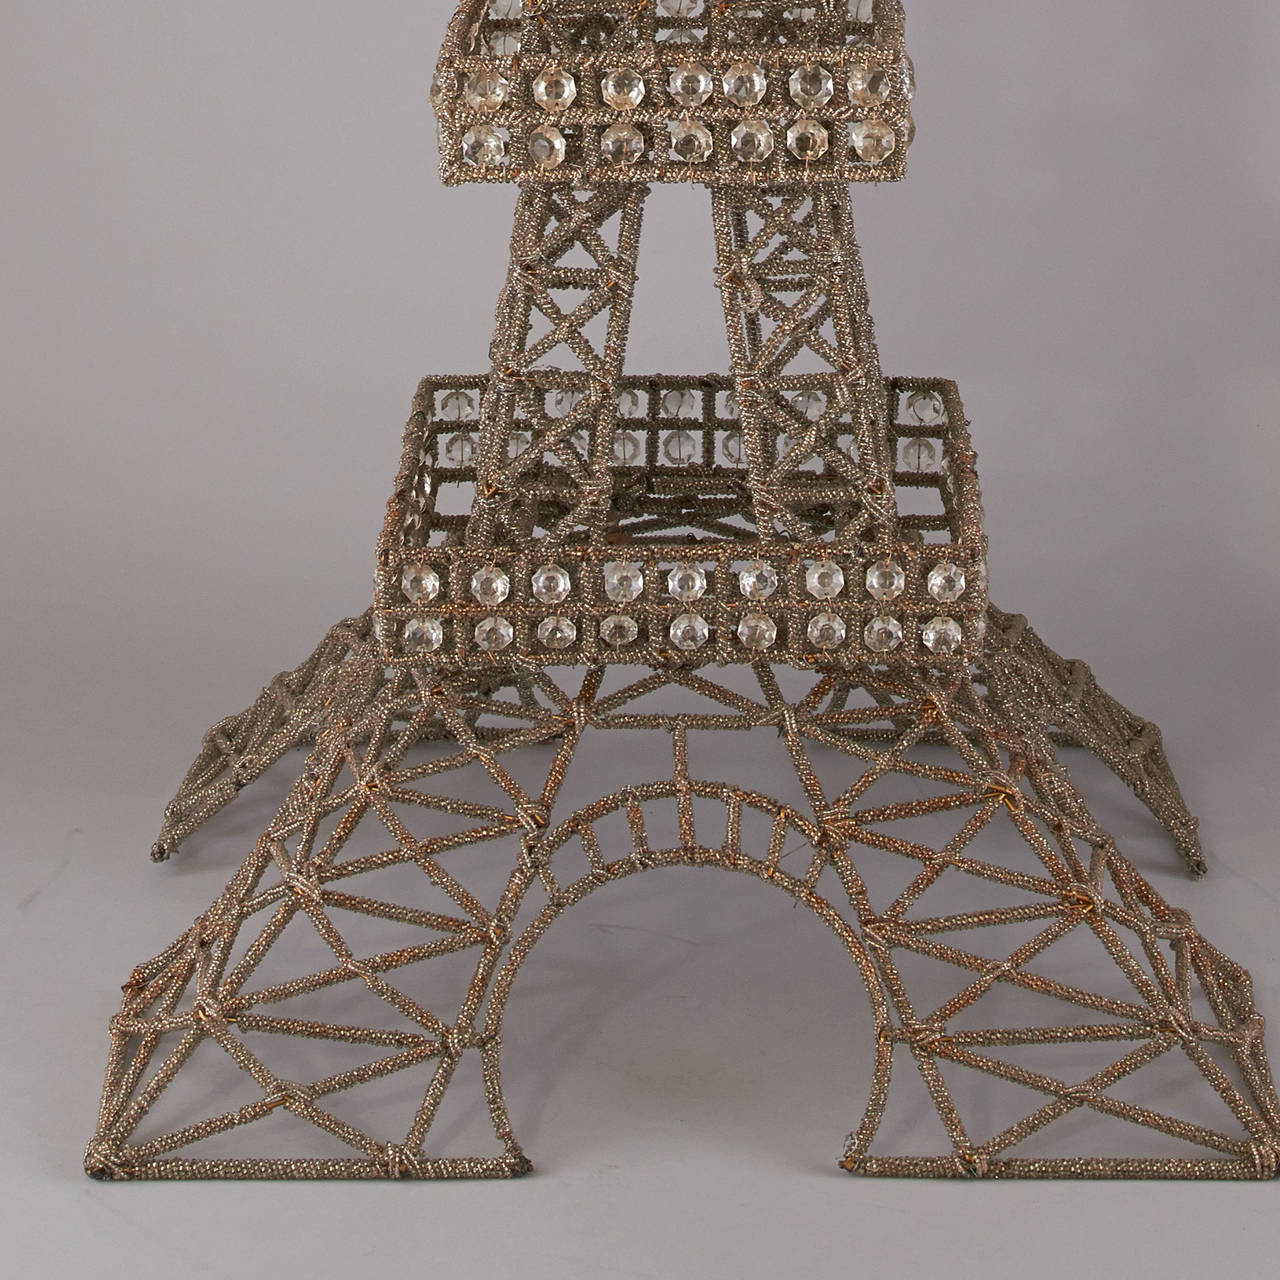 Tall glass beaded Eiffel Tower, France, Midcentury.
The tower is a construction four parts, which are put together.